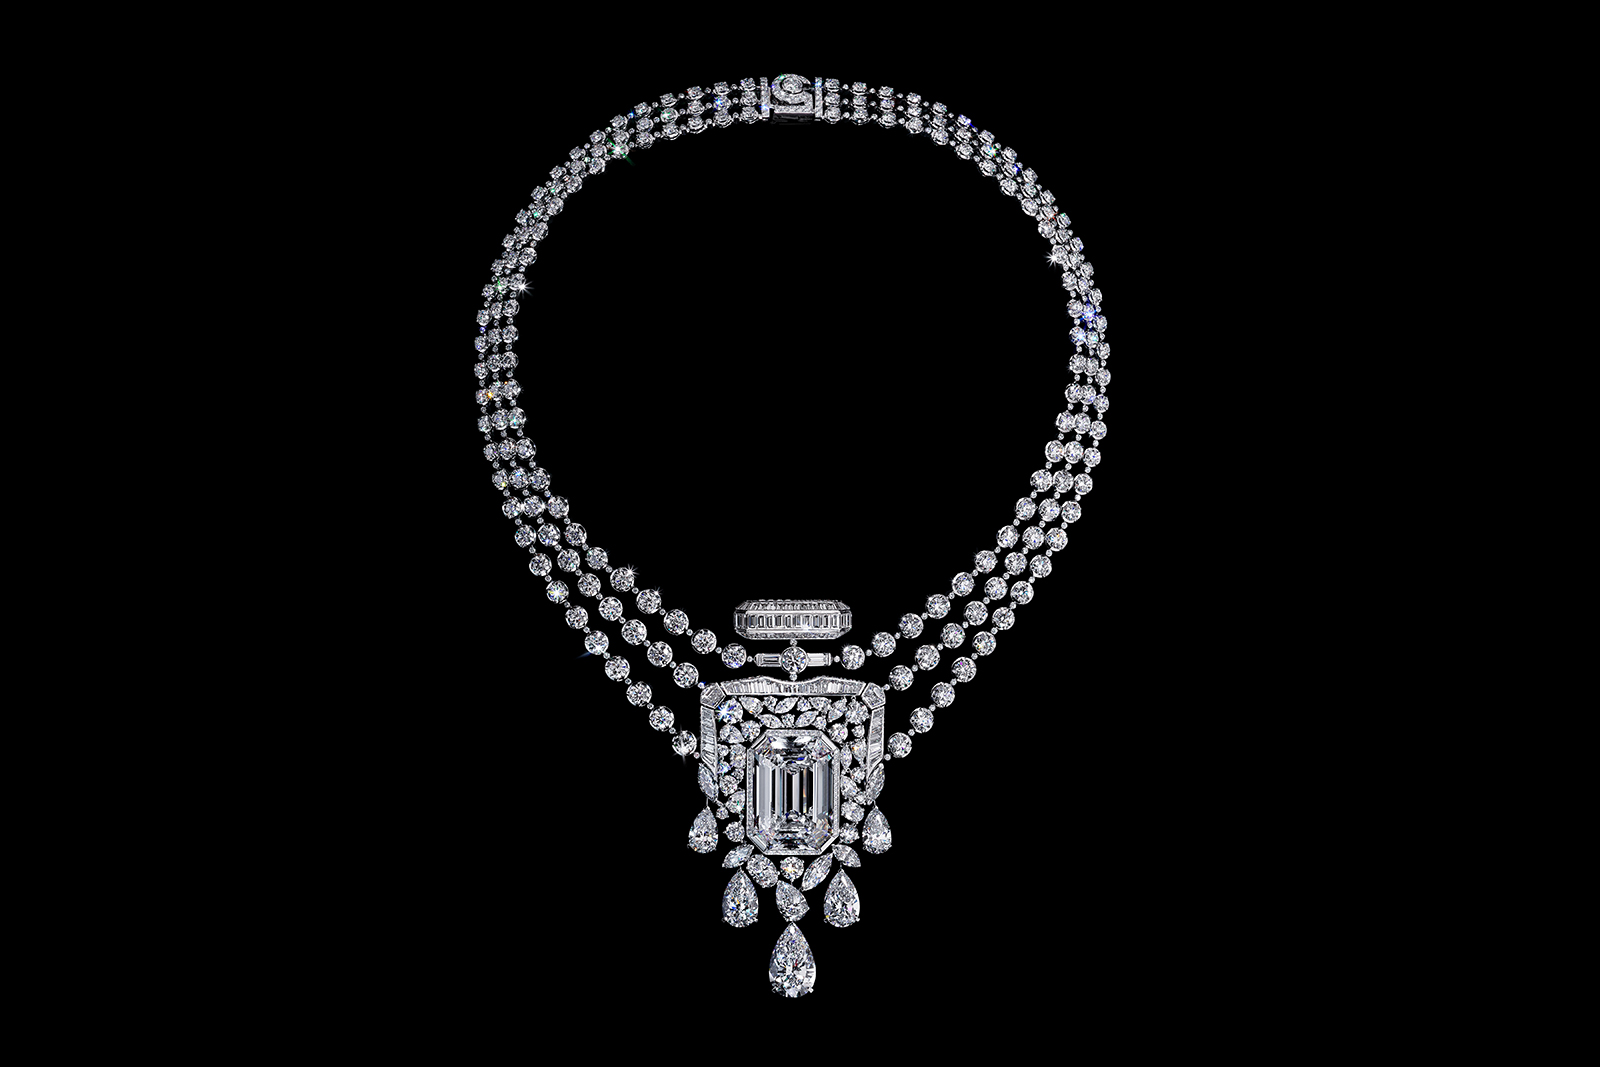 The 55.55 necklace from the Collection N°5 High Jewellery collection to celebrate Chanel's iconic perfume 